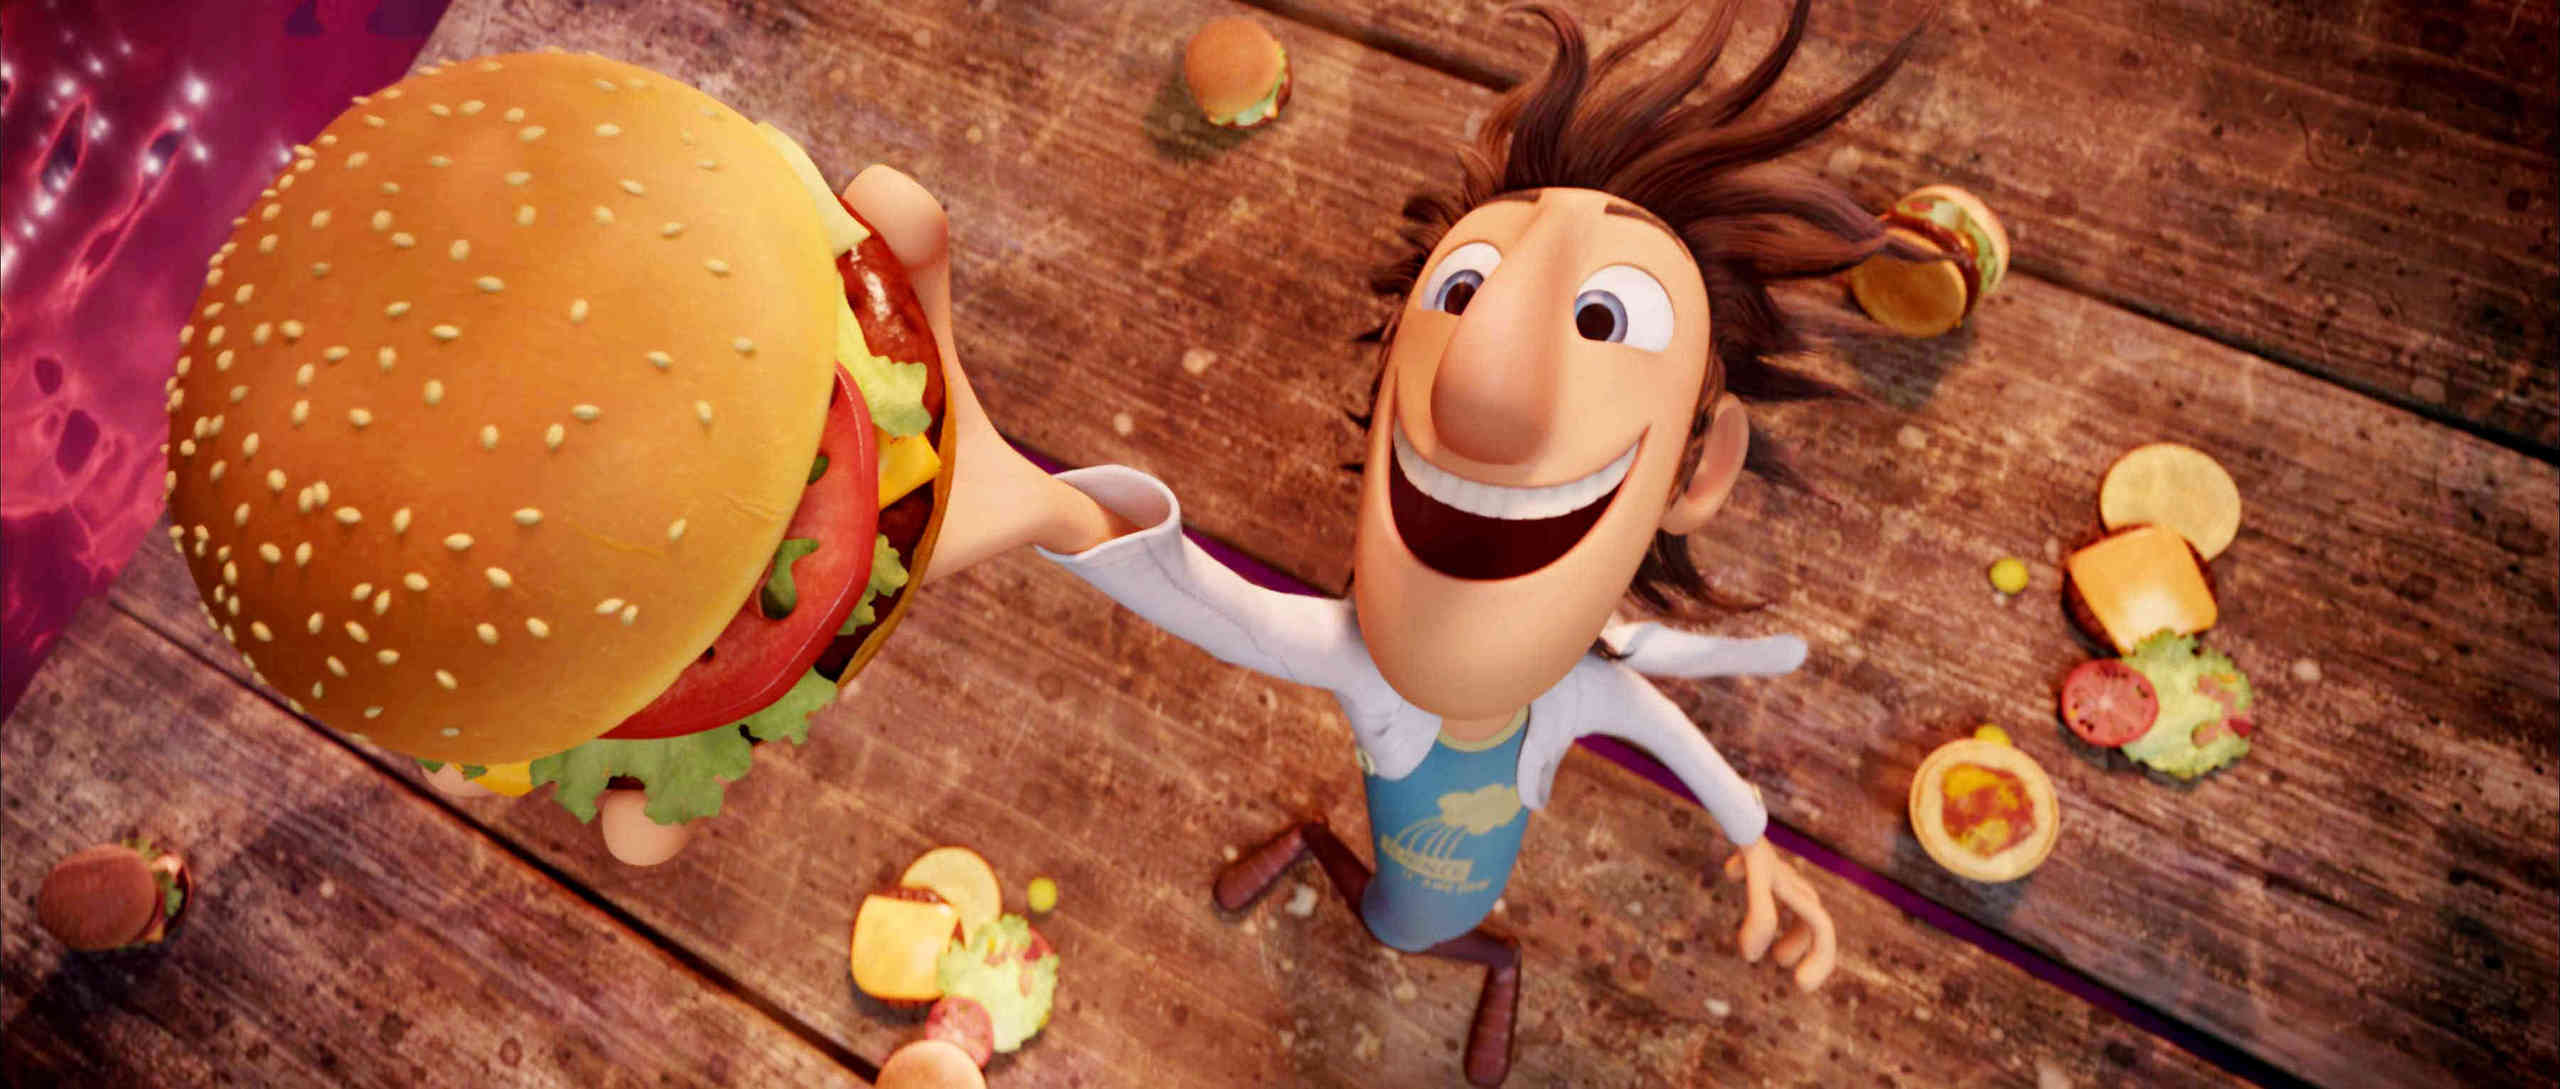 Cloudy With A Chance of Meatballs